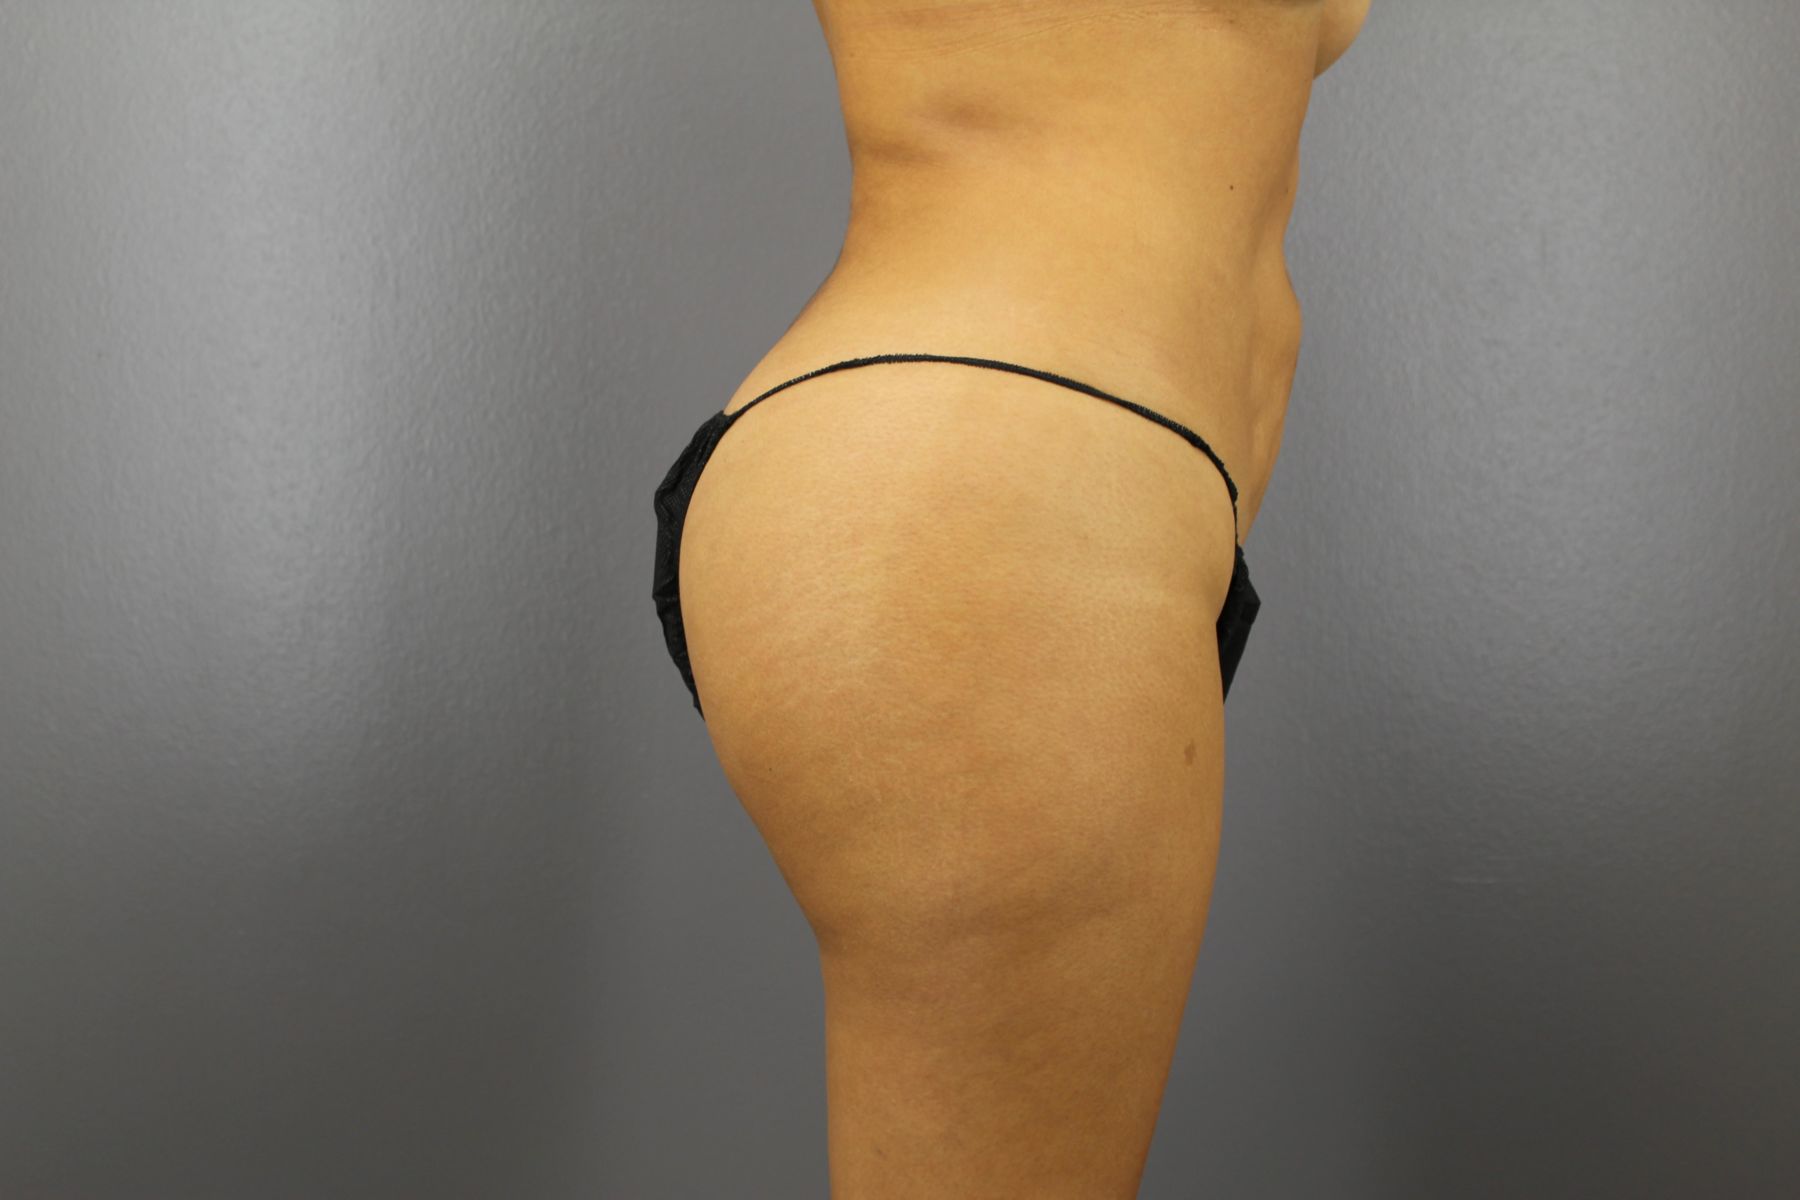 Liposuction and fat transfer